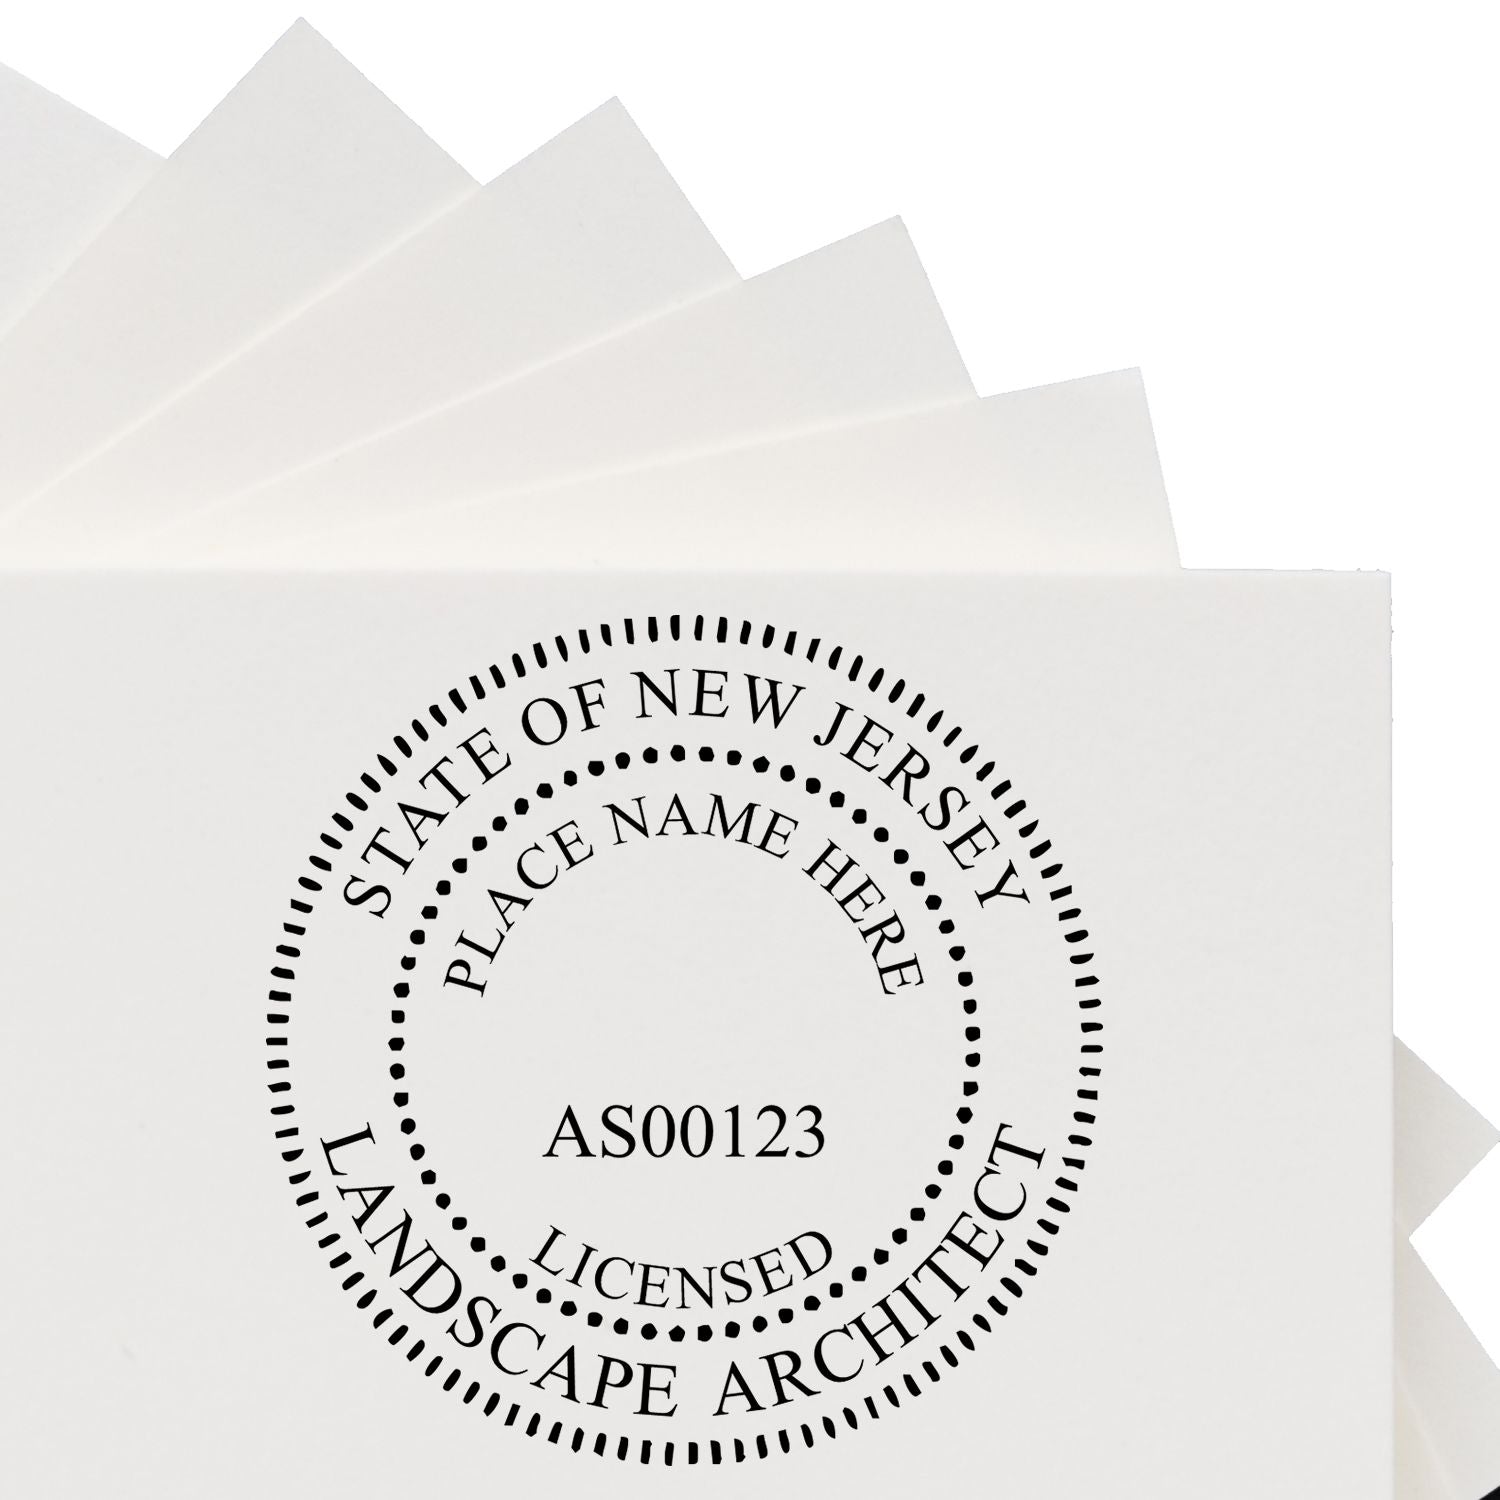 The main image for the Digital New Jersey Landscape Architect Stamp depicting a sample of the imprint and electronic files